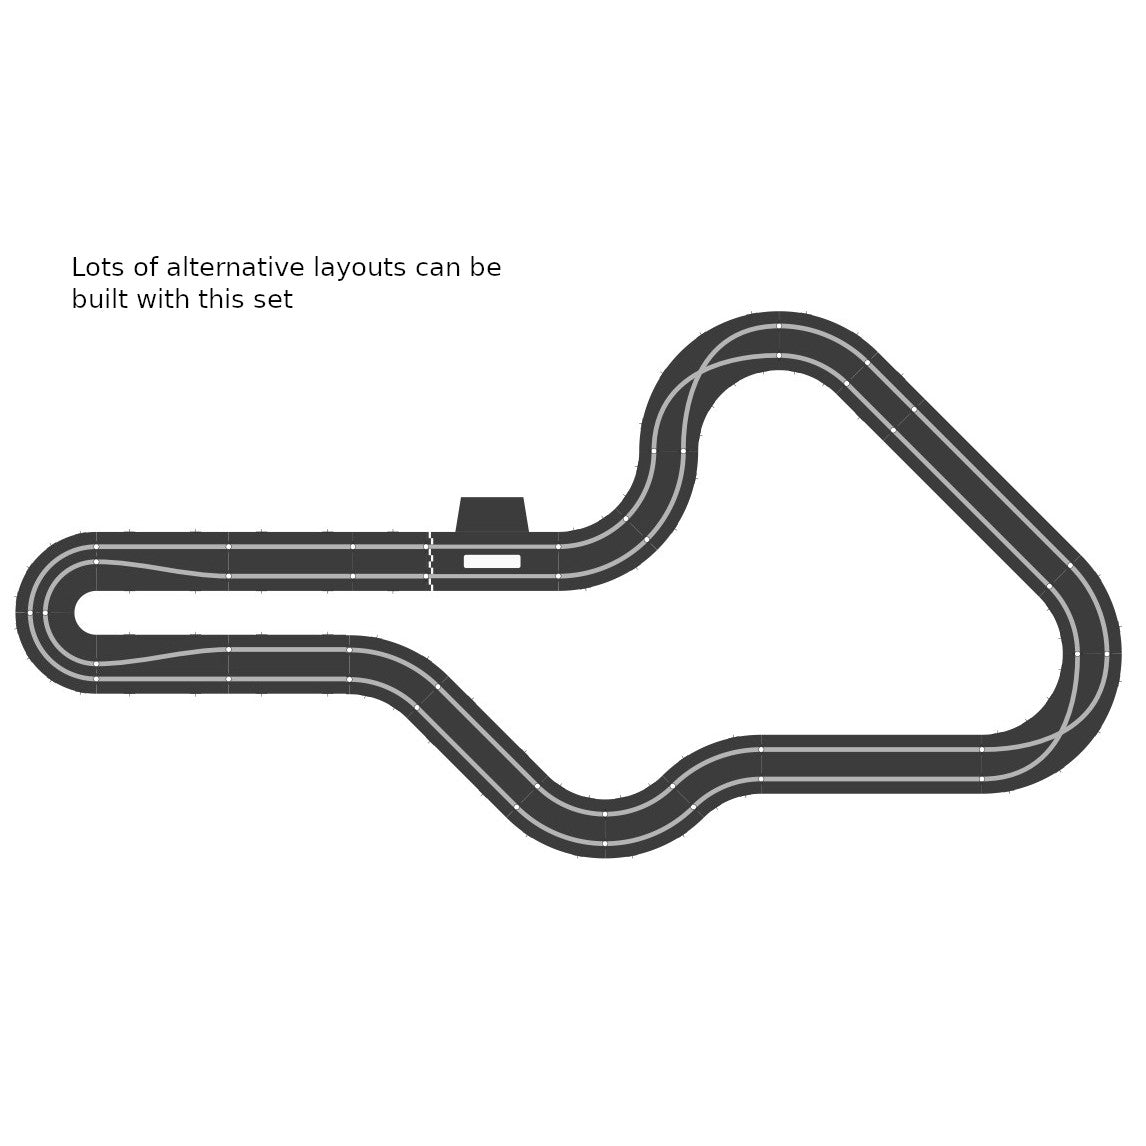 Scalextric Sport 1:32 Track Set Layout - ARC AIR AS4